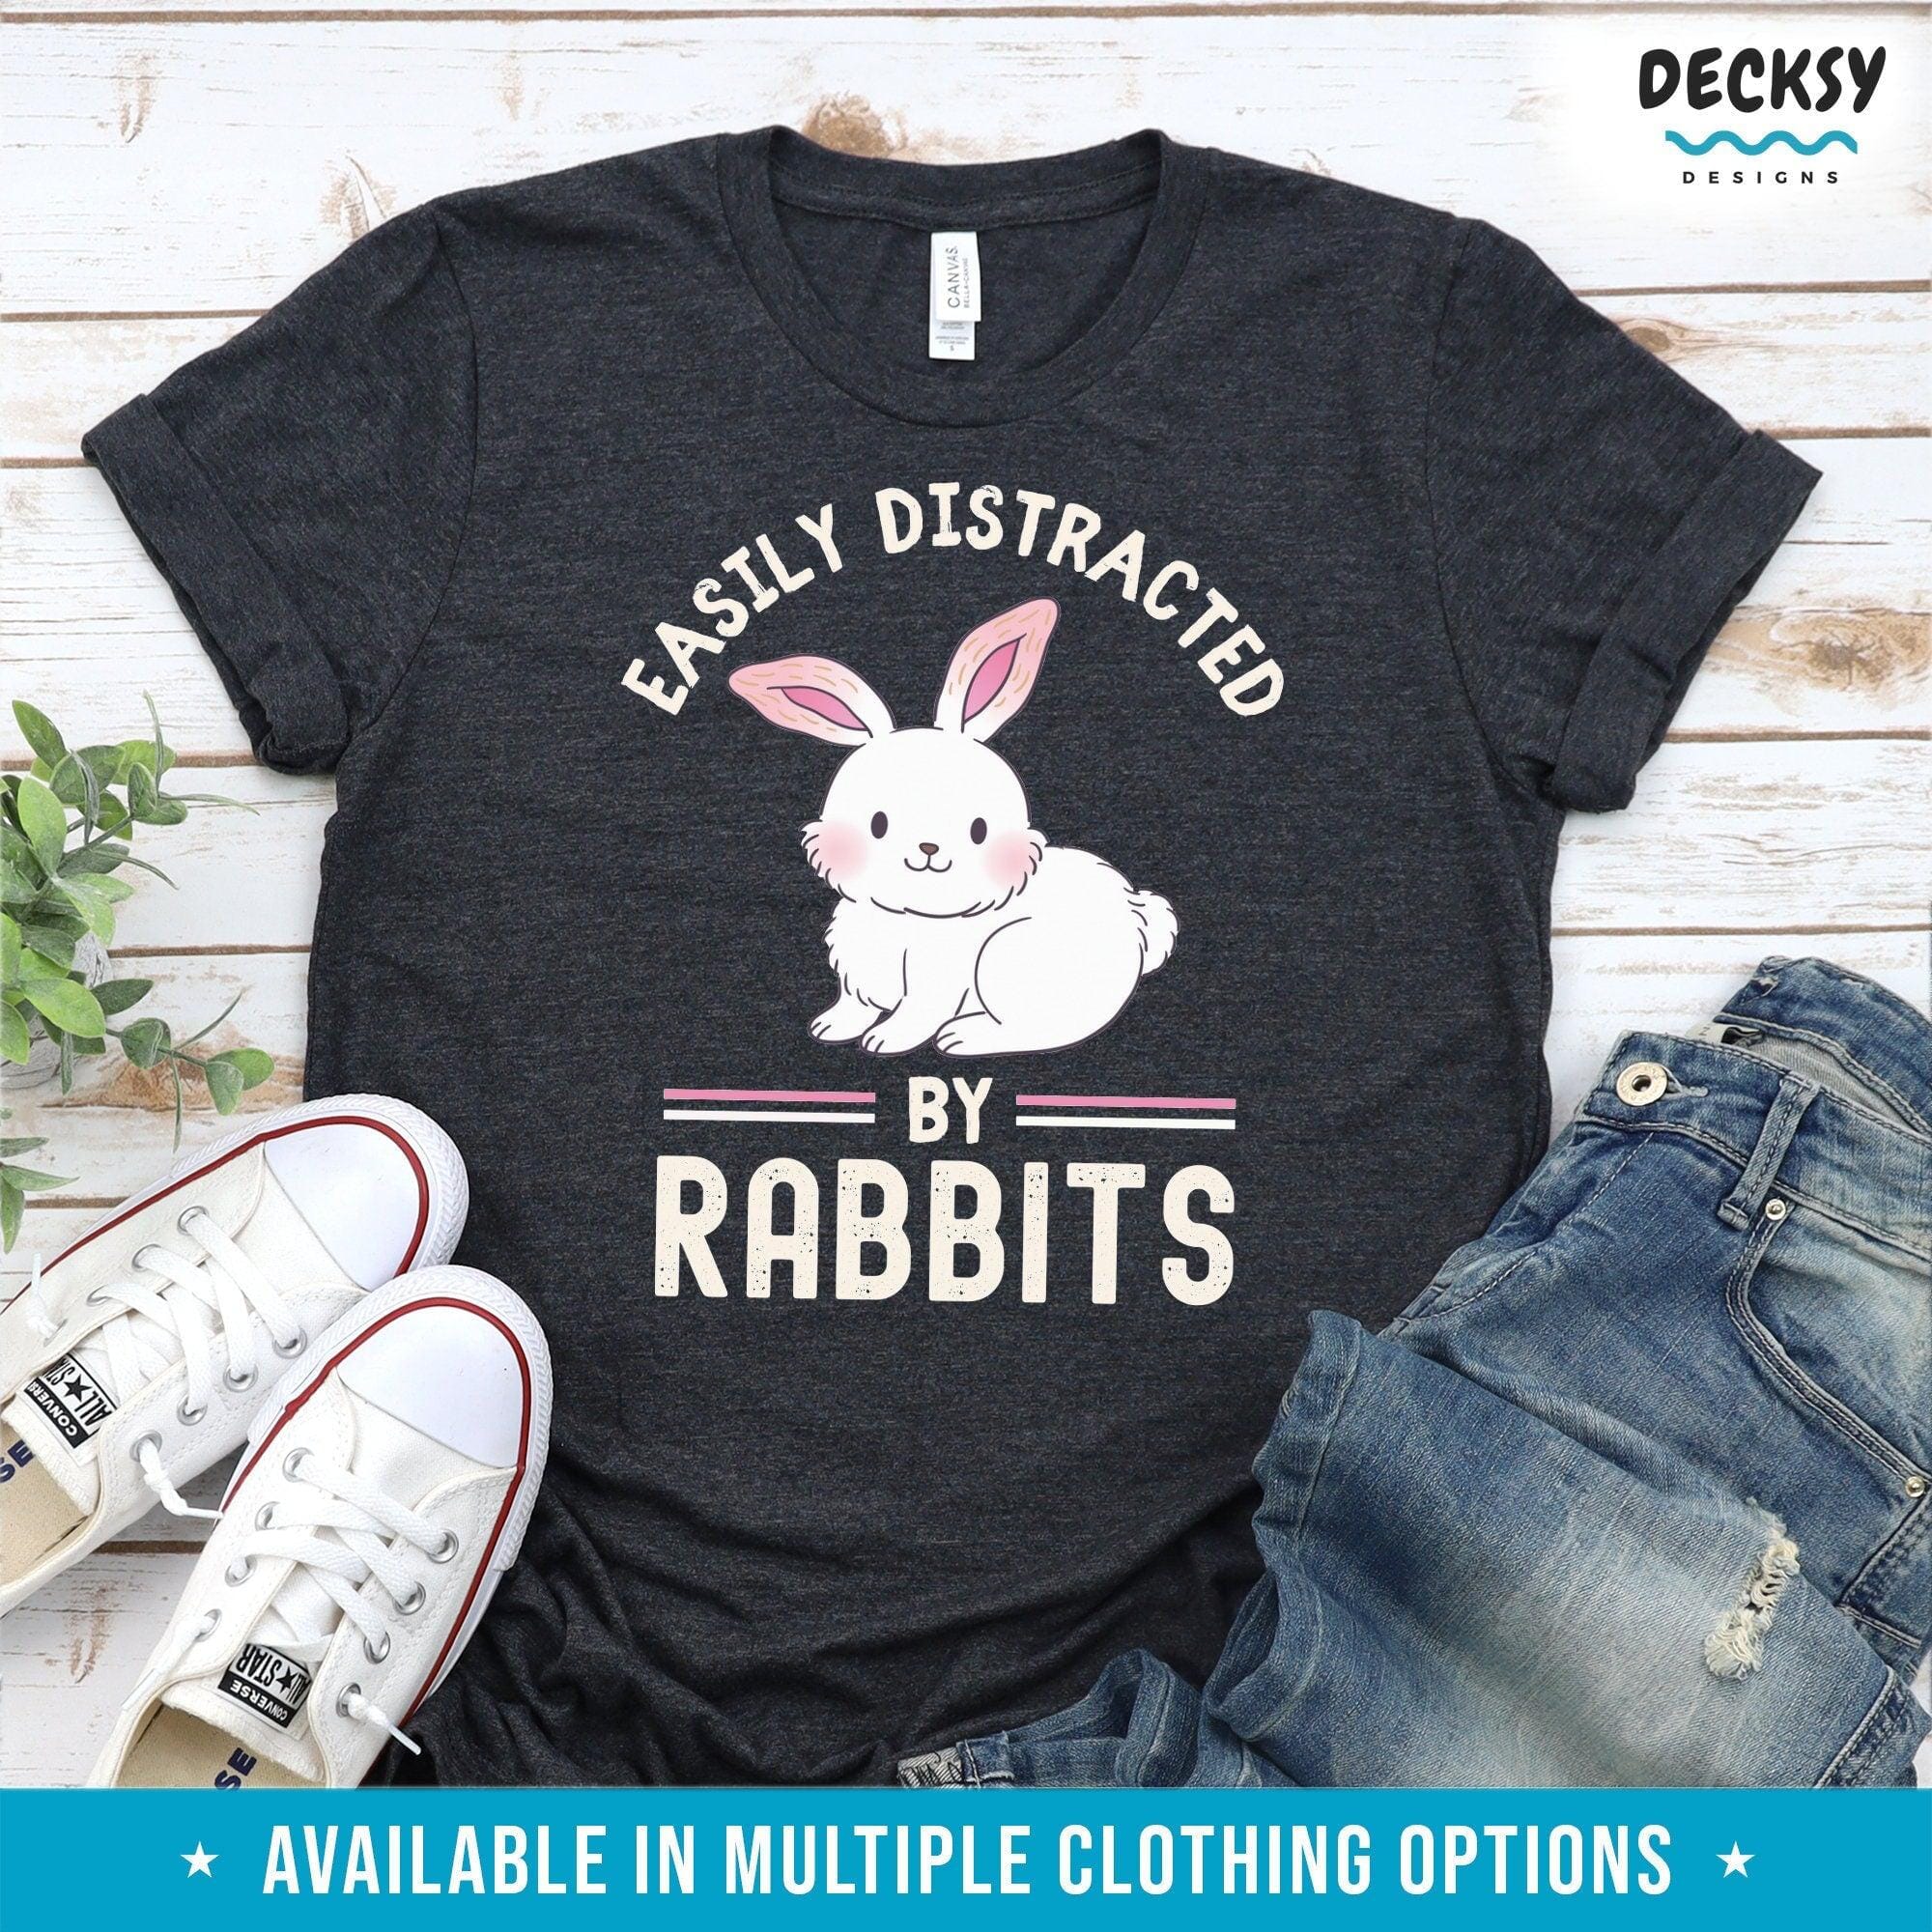 Easily Distracted By Rabbit Shirt, Gift For Rabbit Lover-Clothing:Gender-Neutral Adult Clothing:Tops & Tees:T-shirts:Graphic Tees-DecksyDesigns